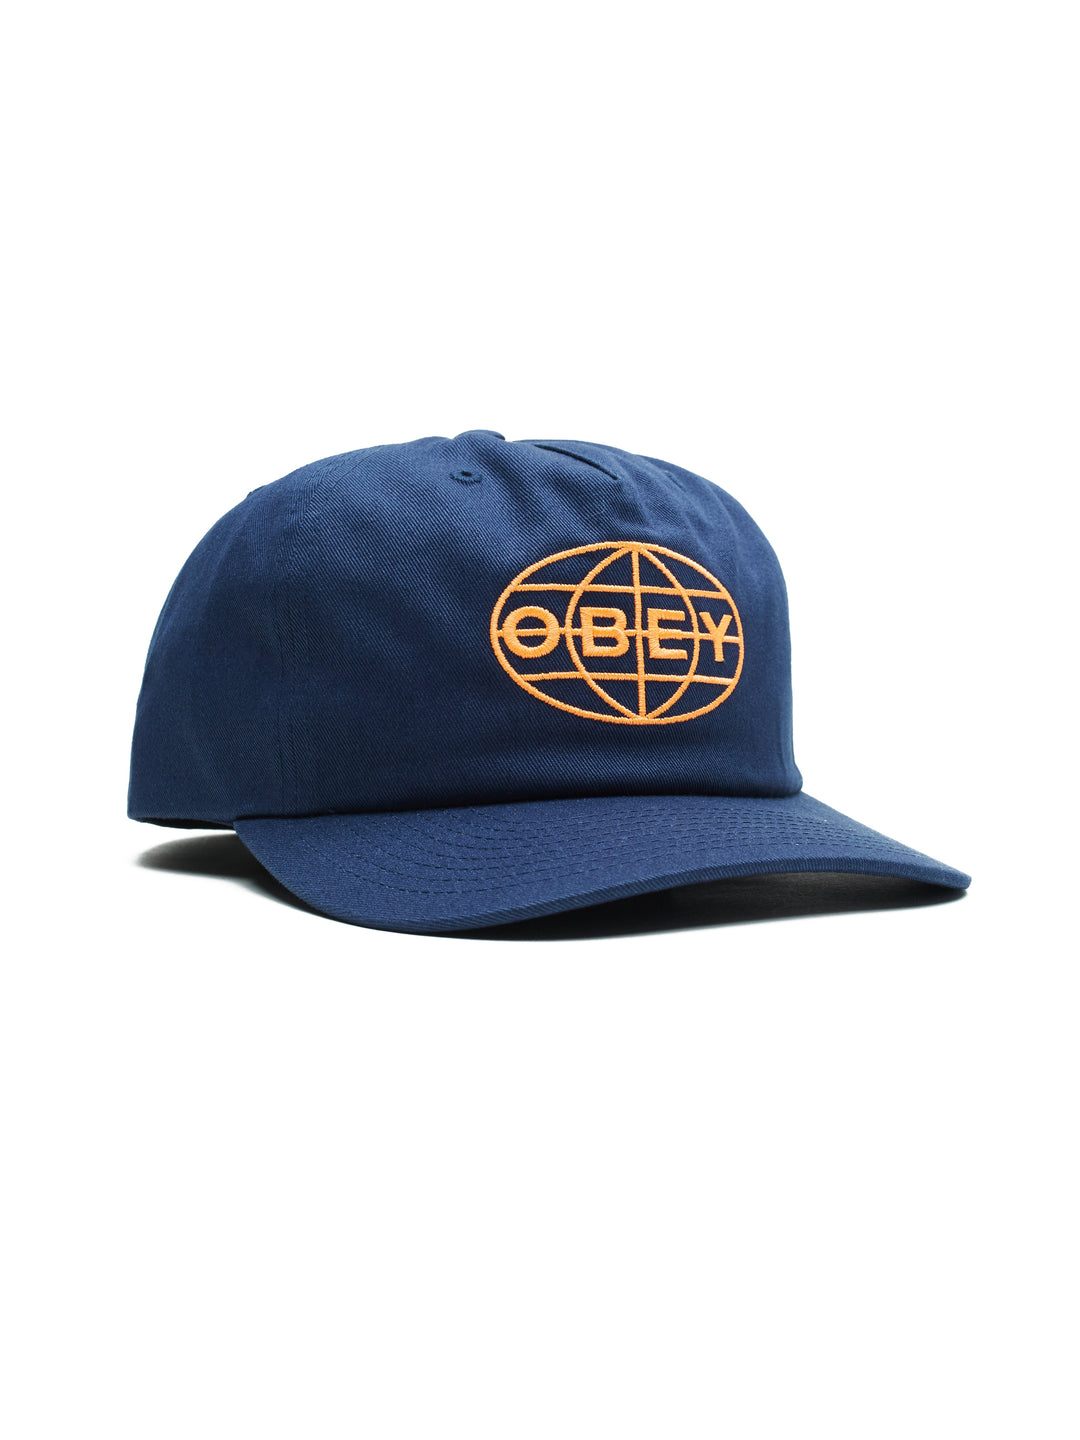 Gravity Snapback | Navy - West of Camden - Main Image Number 1 of 2